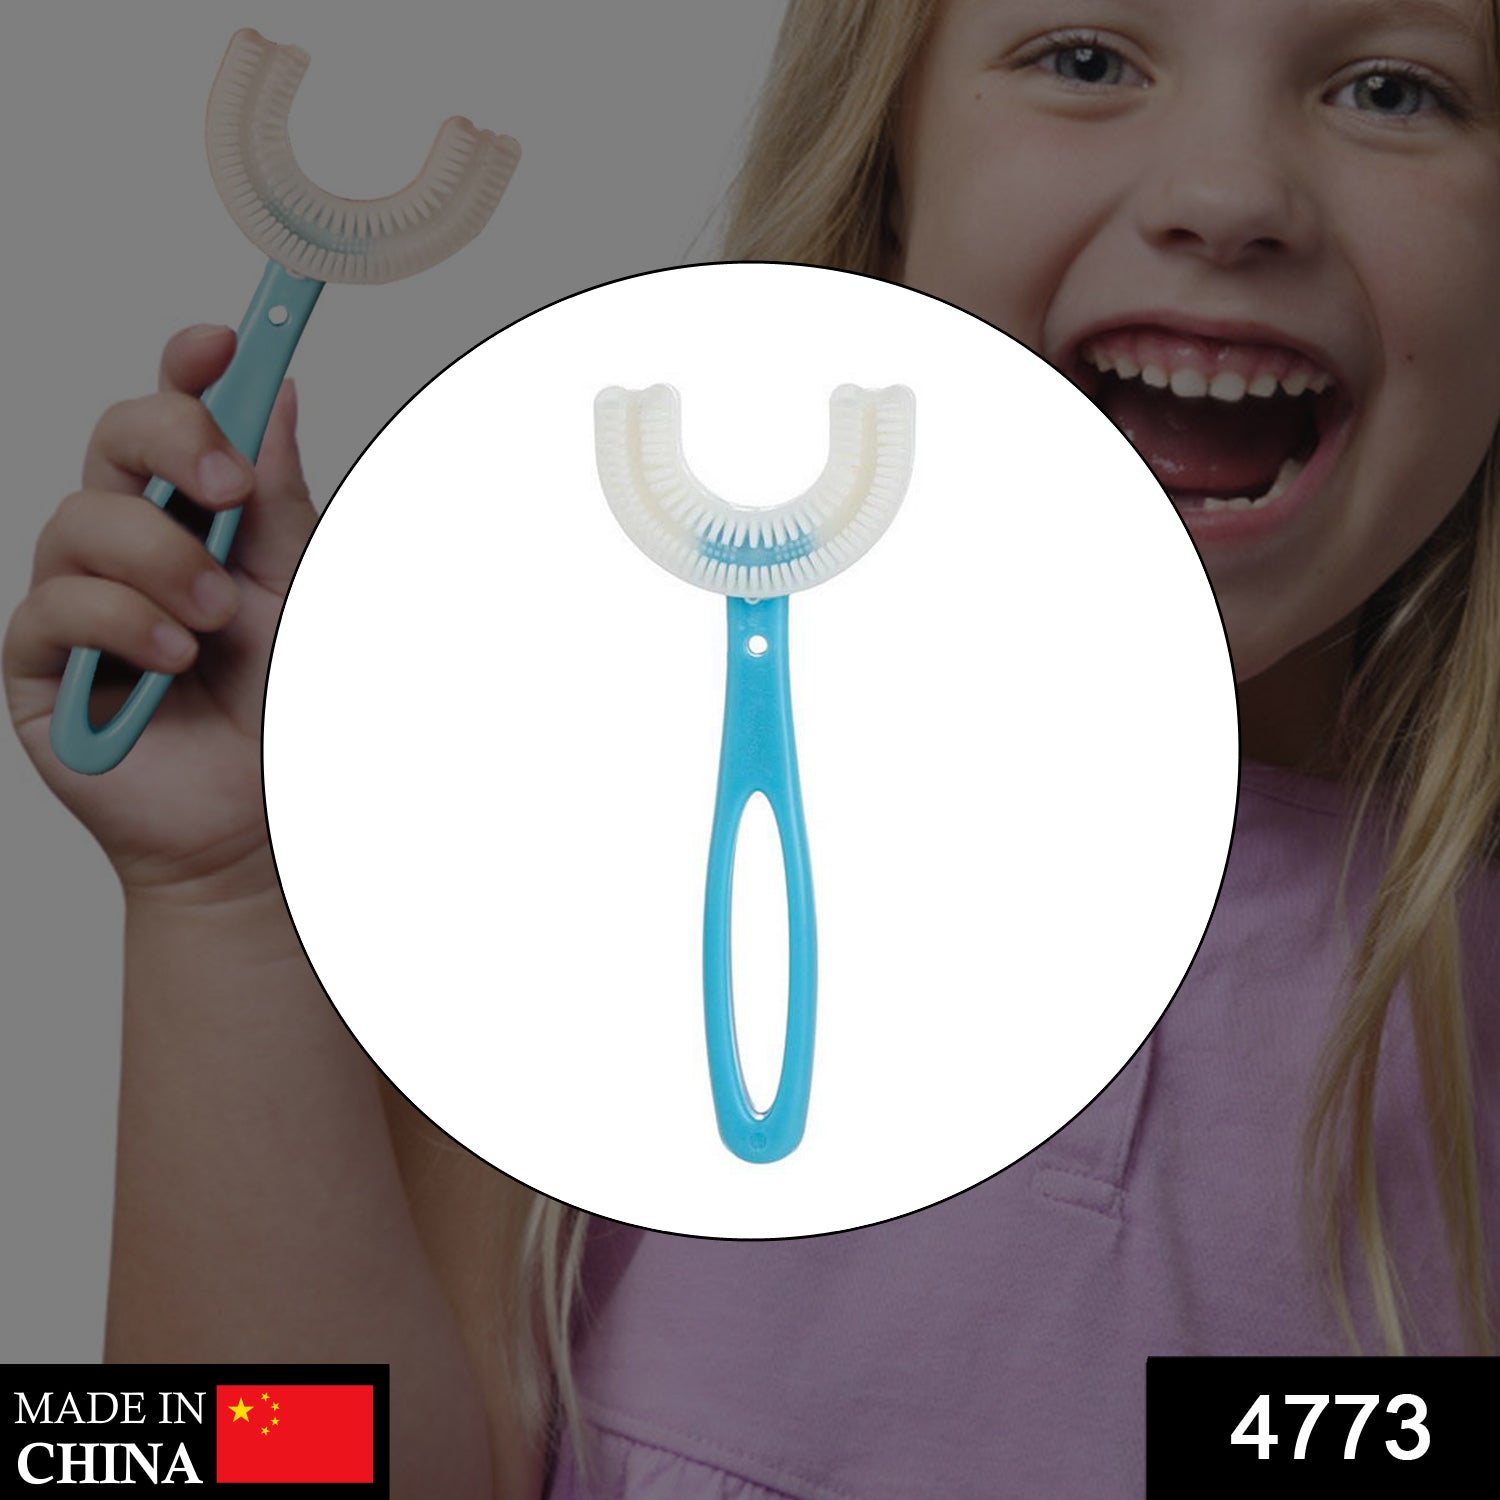 4773 Kids U Shaped Large Tooth Brush used in all kinds of household bathroom places for washing teeth of kids, toddlers and children’s easily and comfortably.